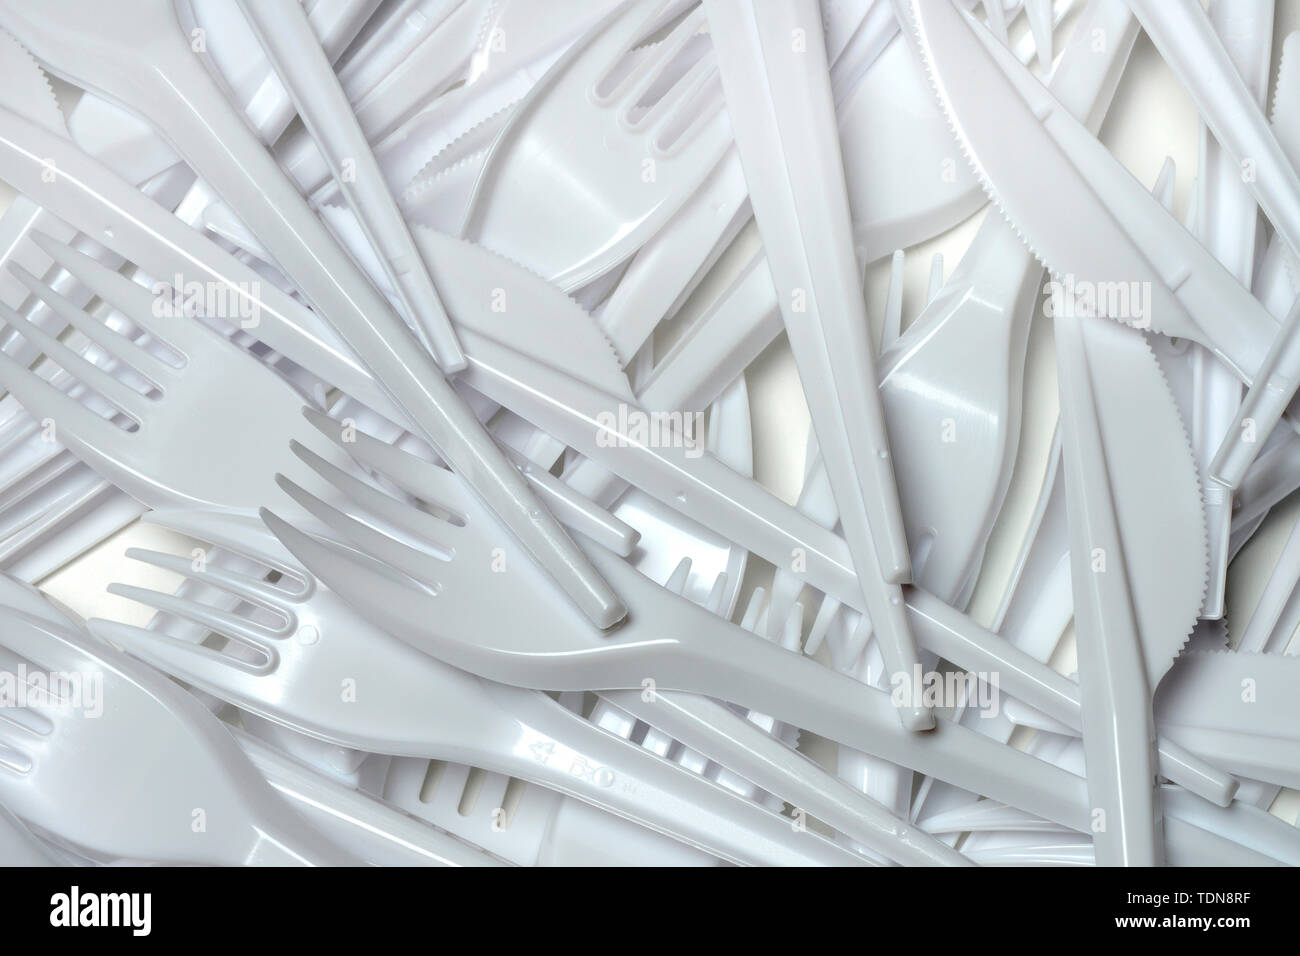 Plastic forks High Resolution Stock Photography and Images - Alamy